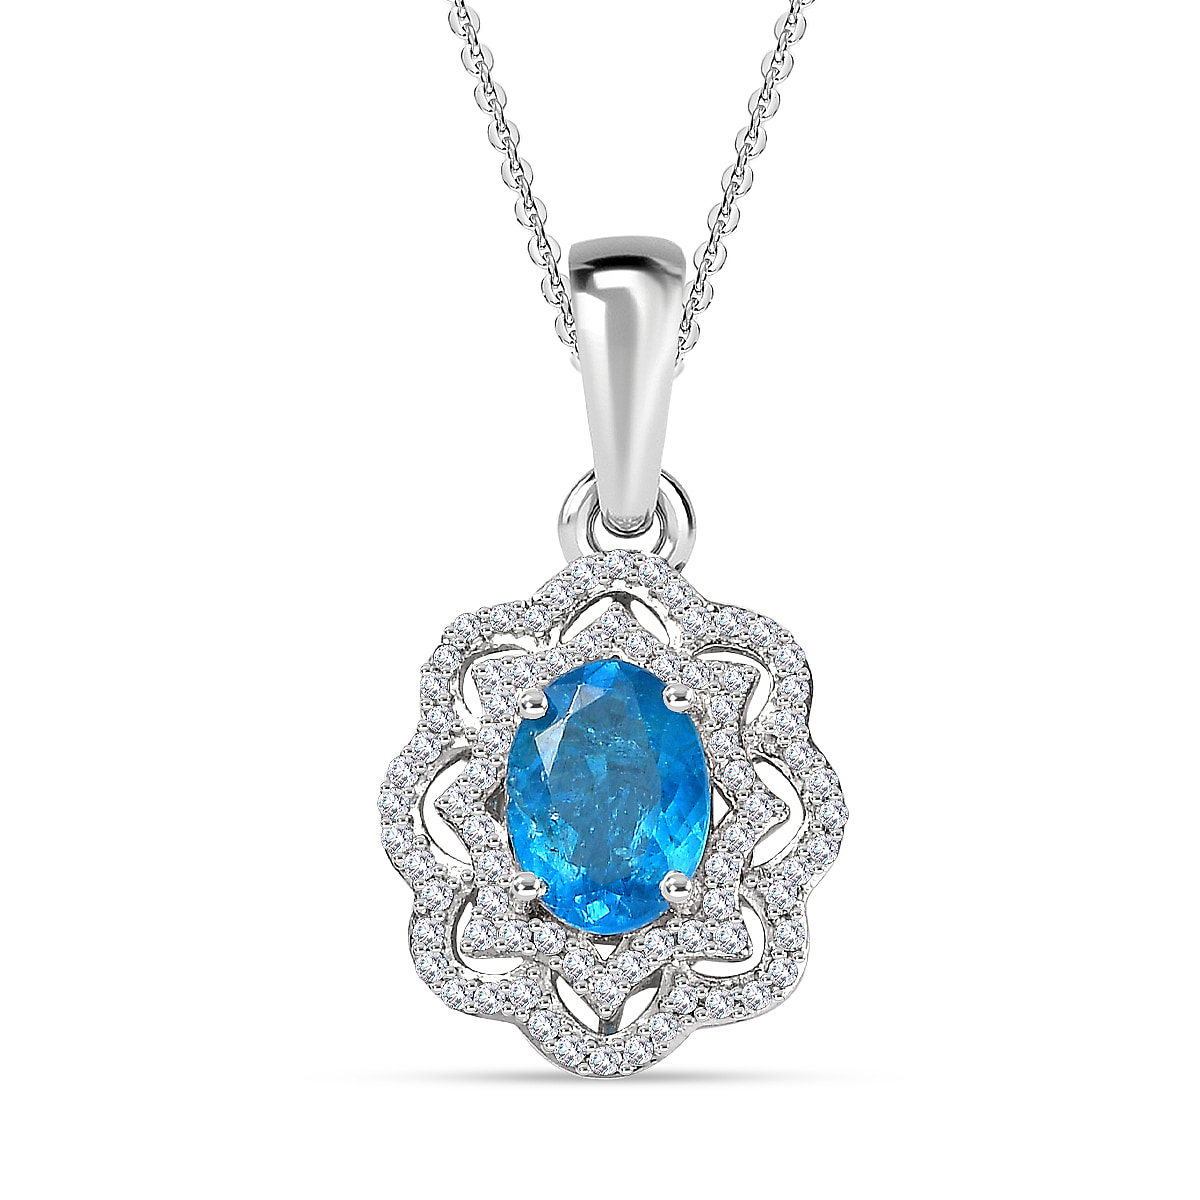 THE NEON QUEEN - Premium Neon Apatite & Natural Zircon Pendant with Chain (Size 20) in Platinum Overlay Sterling Silver 2.06 Ct